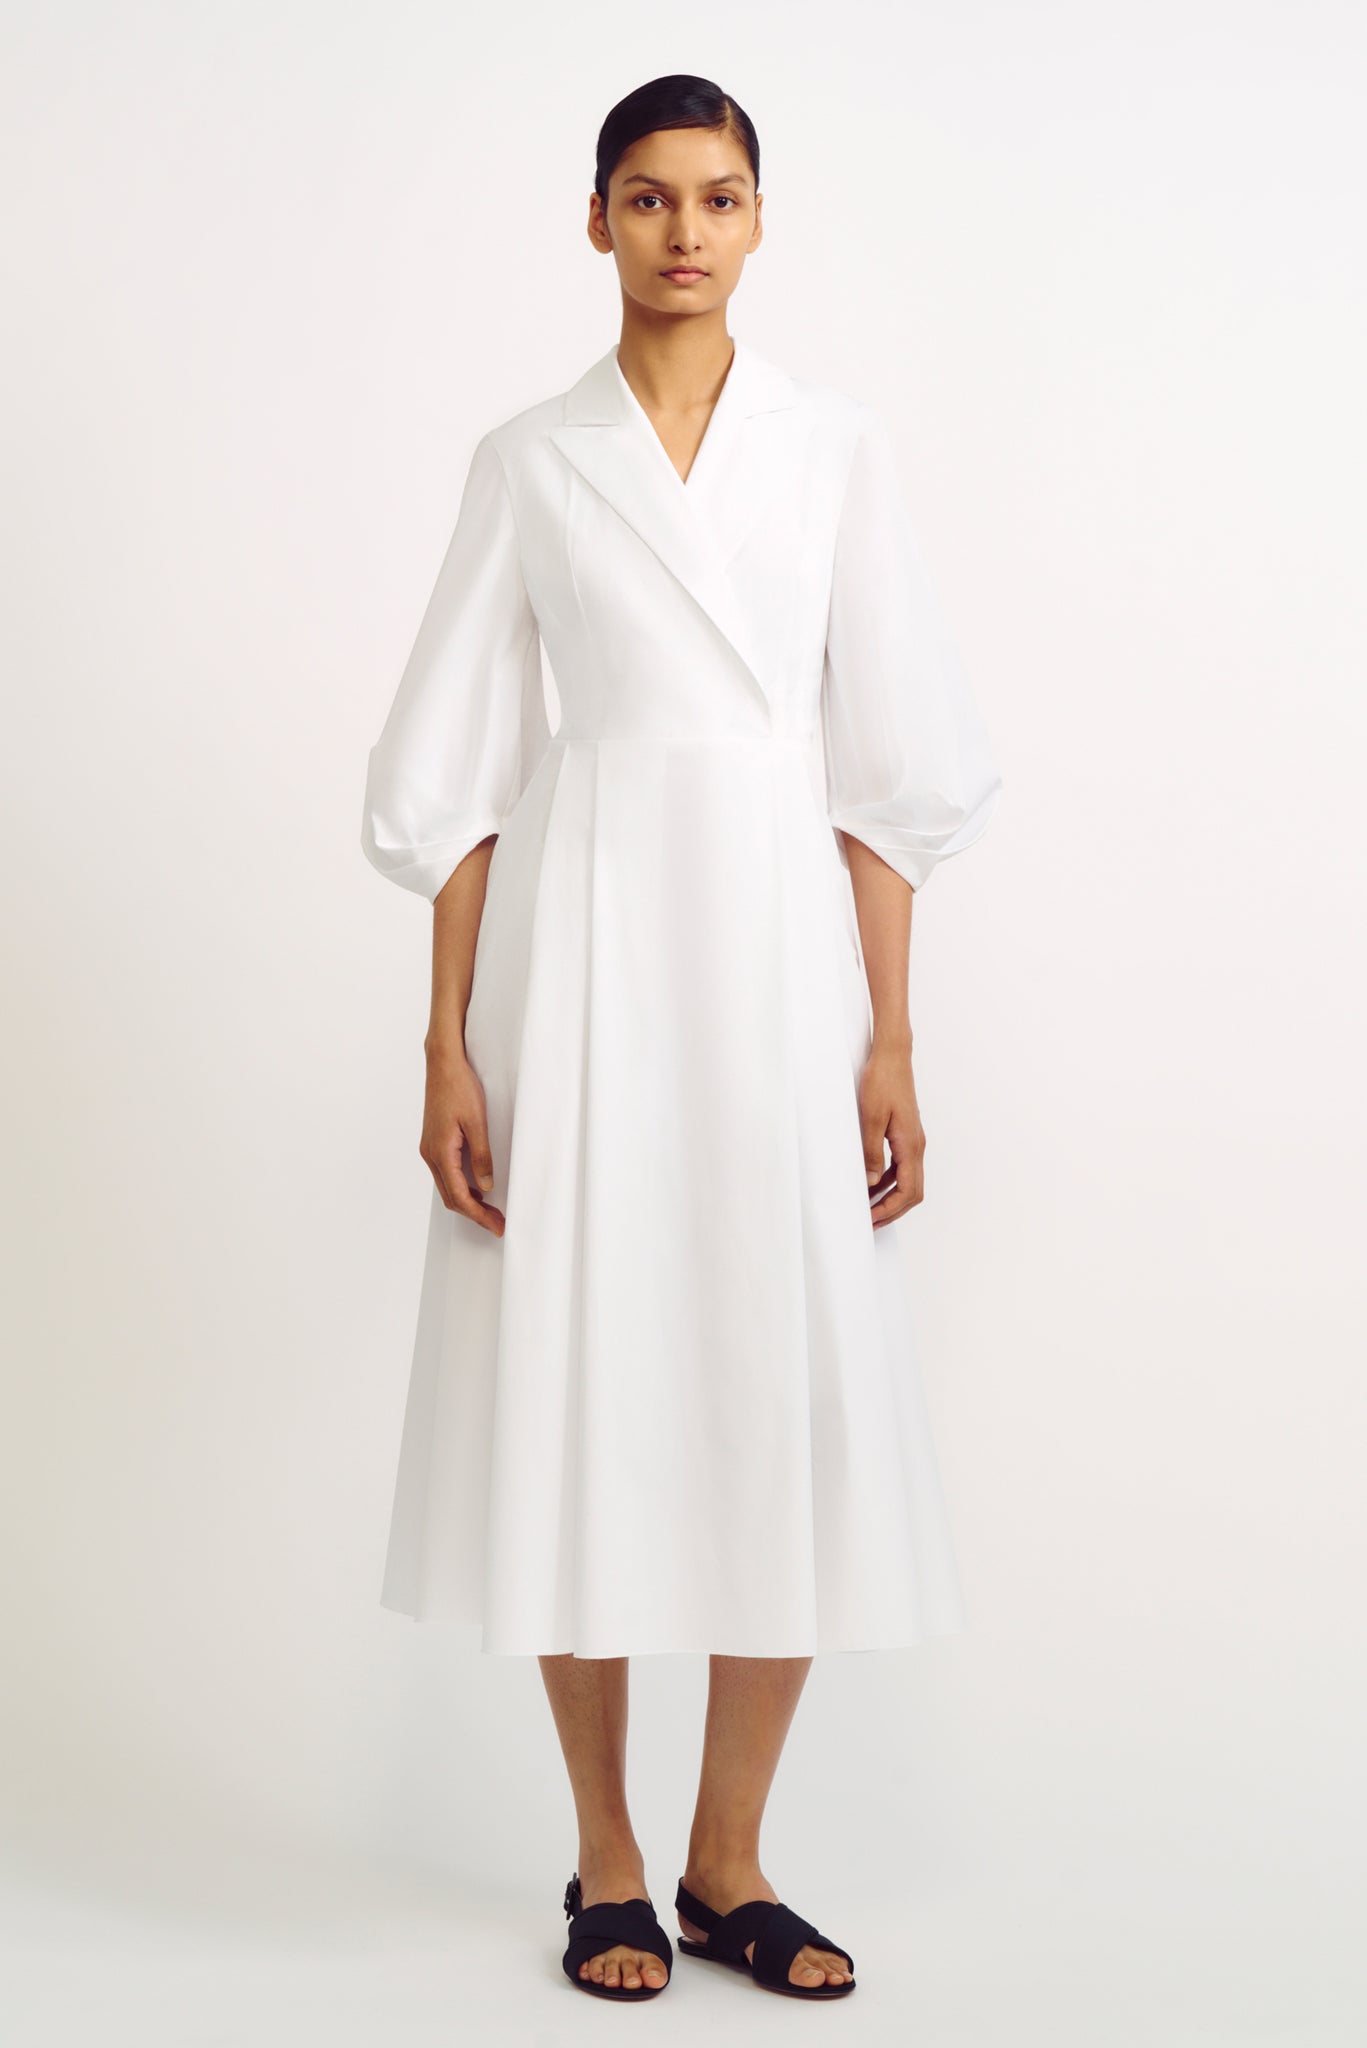 Brittany Dress | White Cotton Long Sleeve Wrap Front Dress | Emilia Wickstead